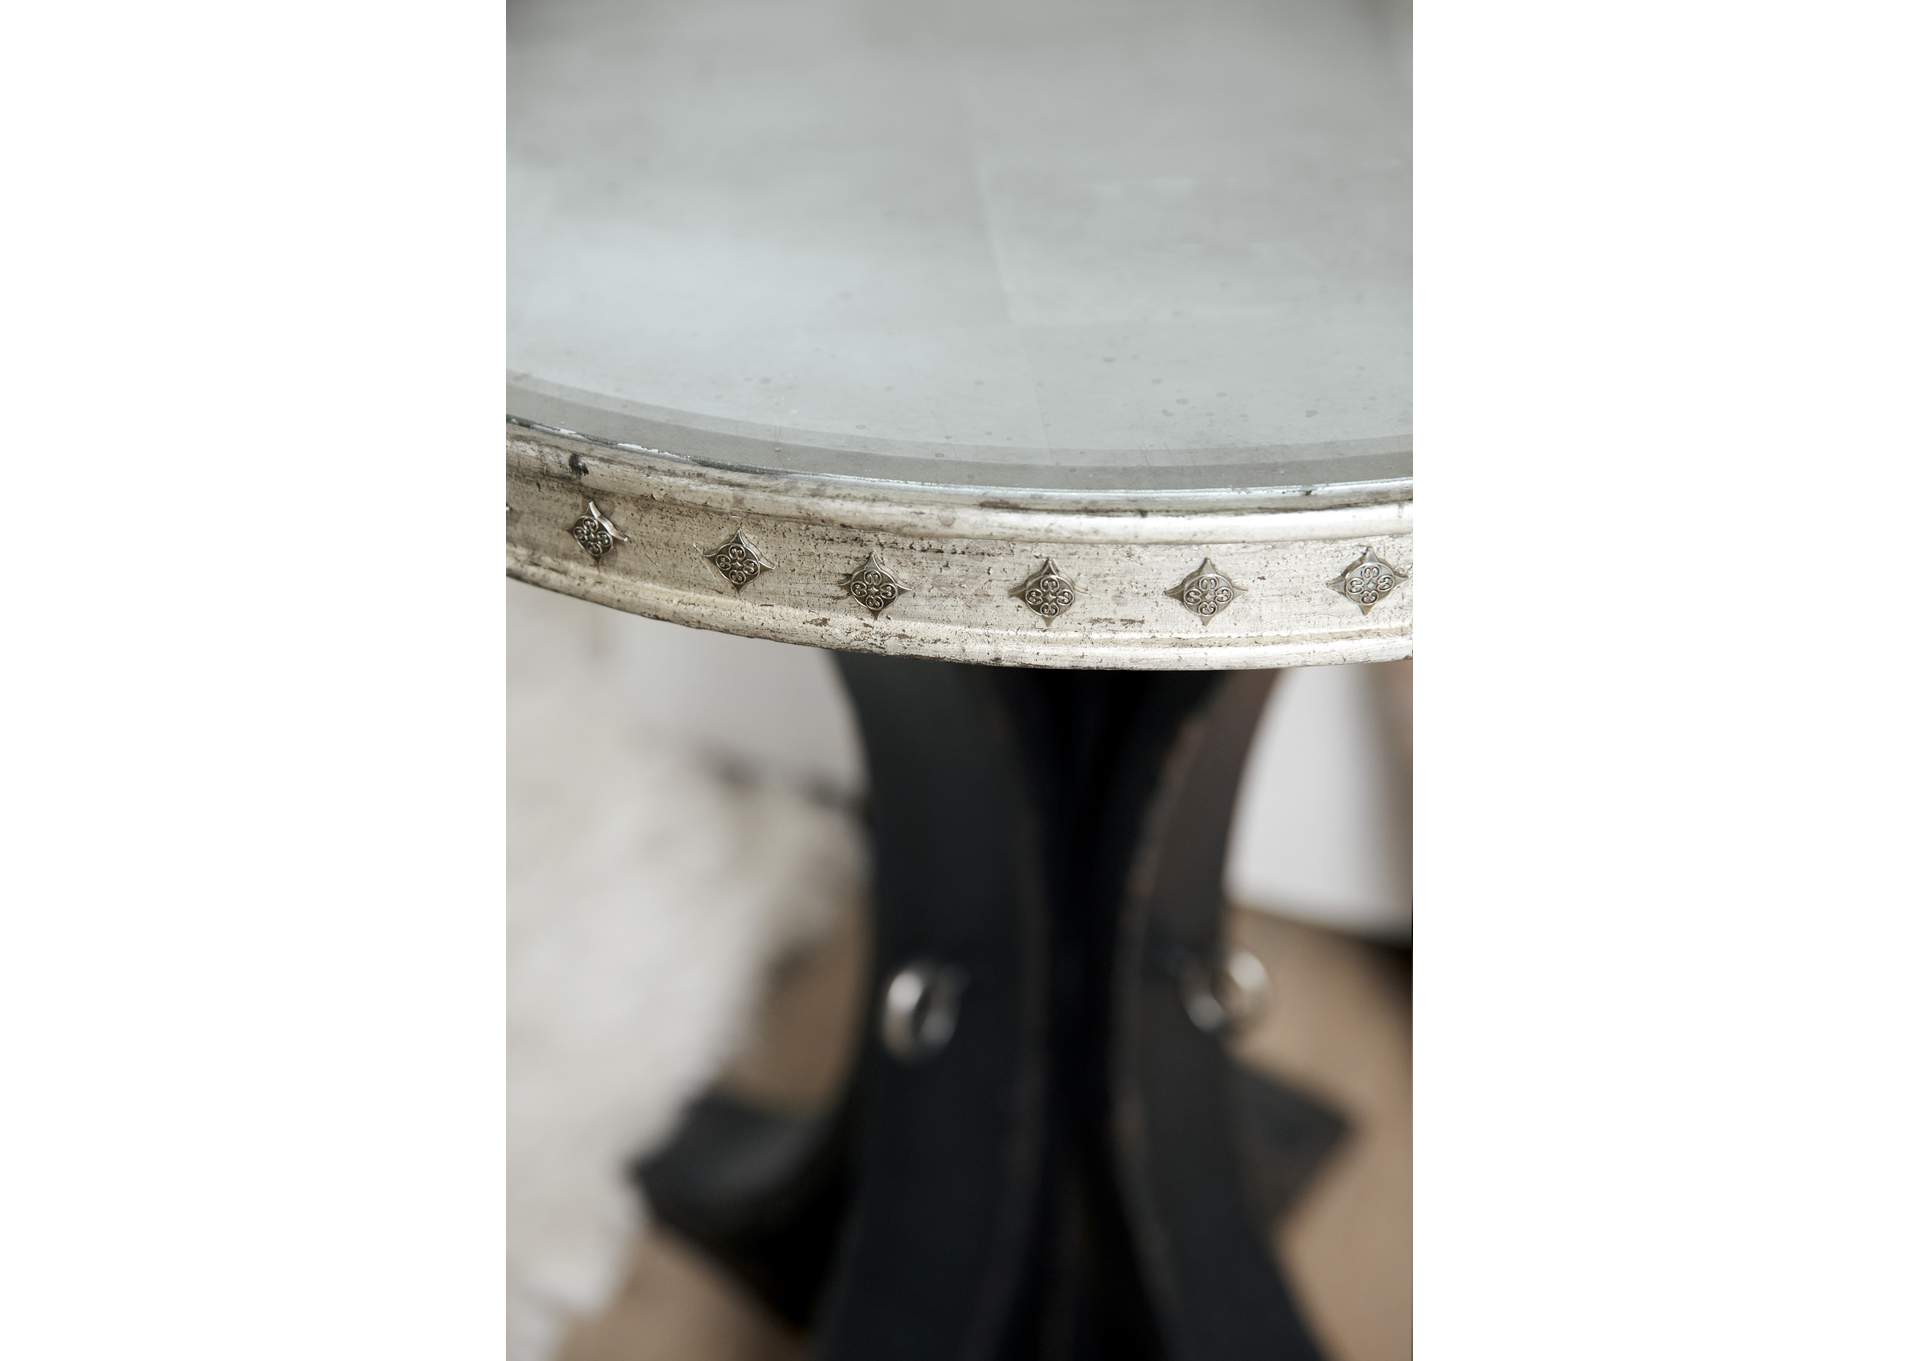 Sanctuary French 75 Champagne Table,Hooker Furniture